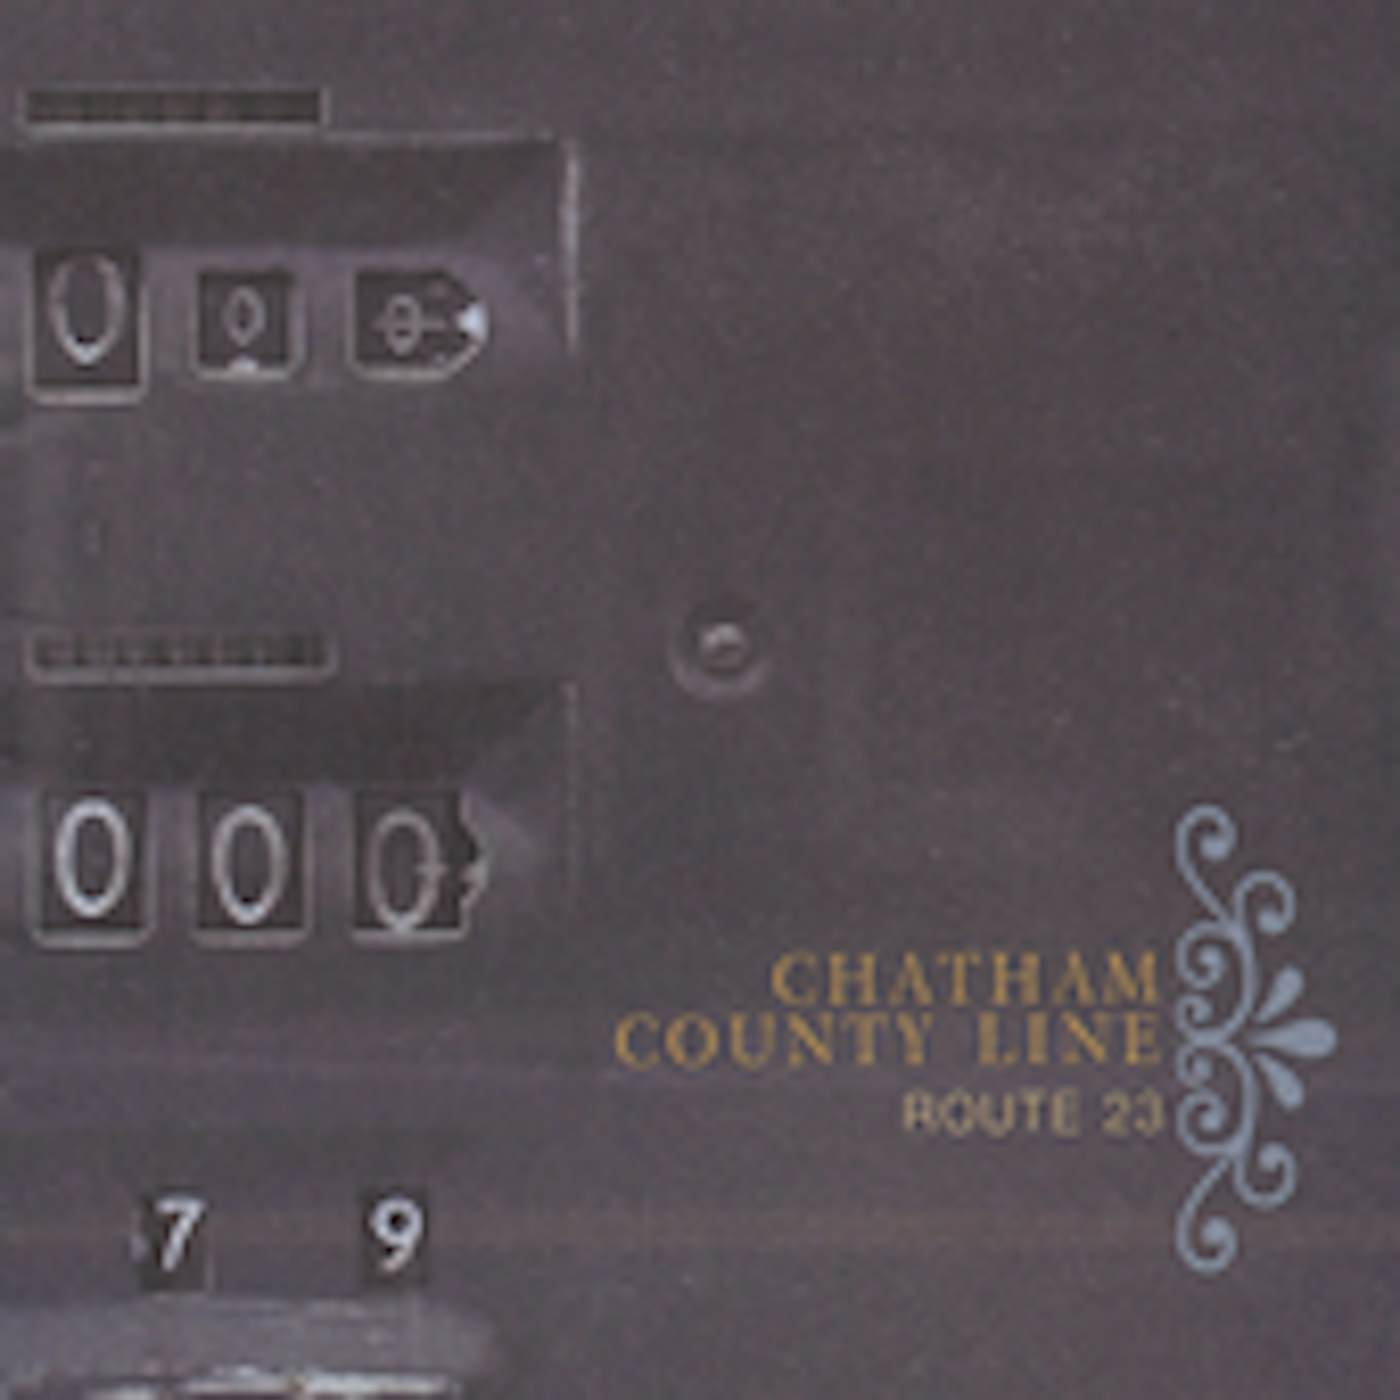 Chatham County Line ROUTE 23 CD